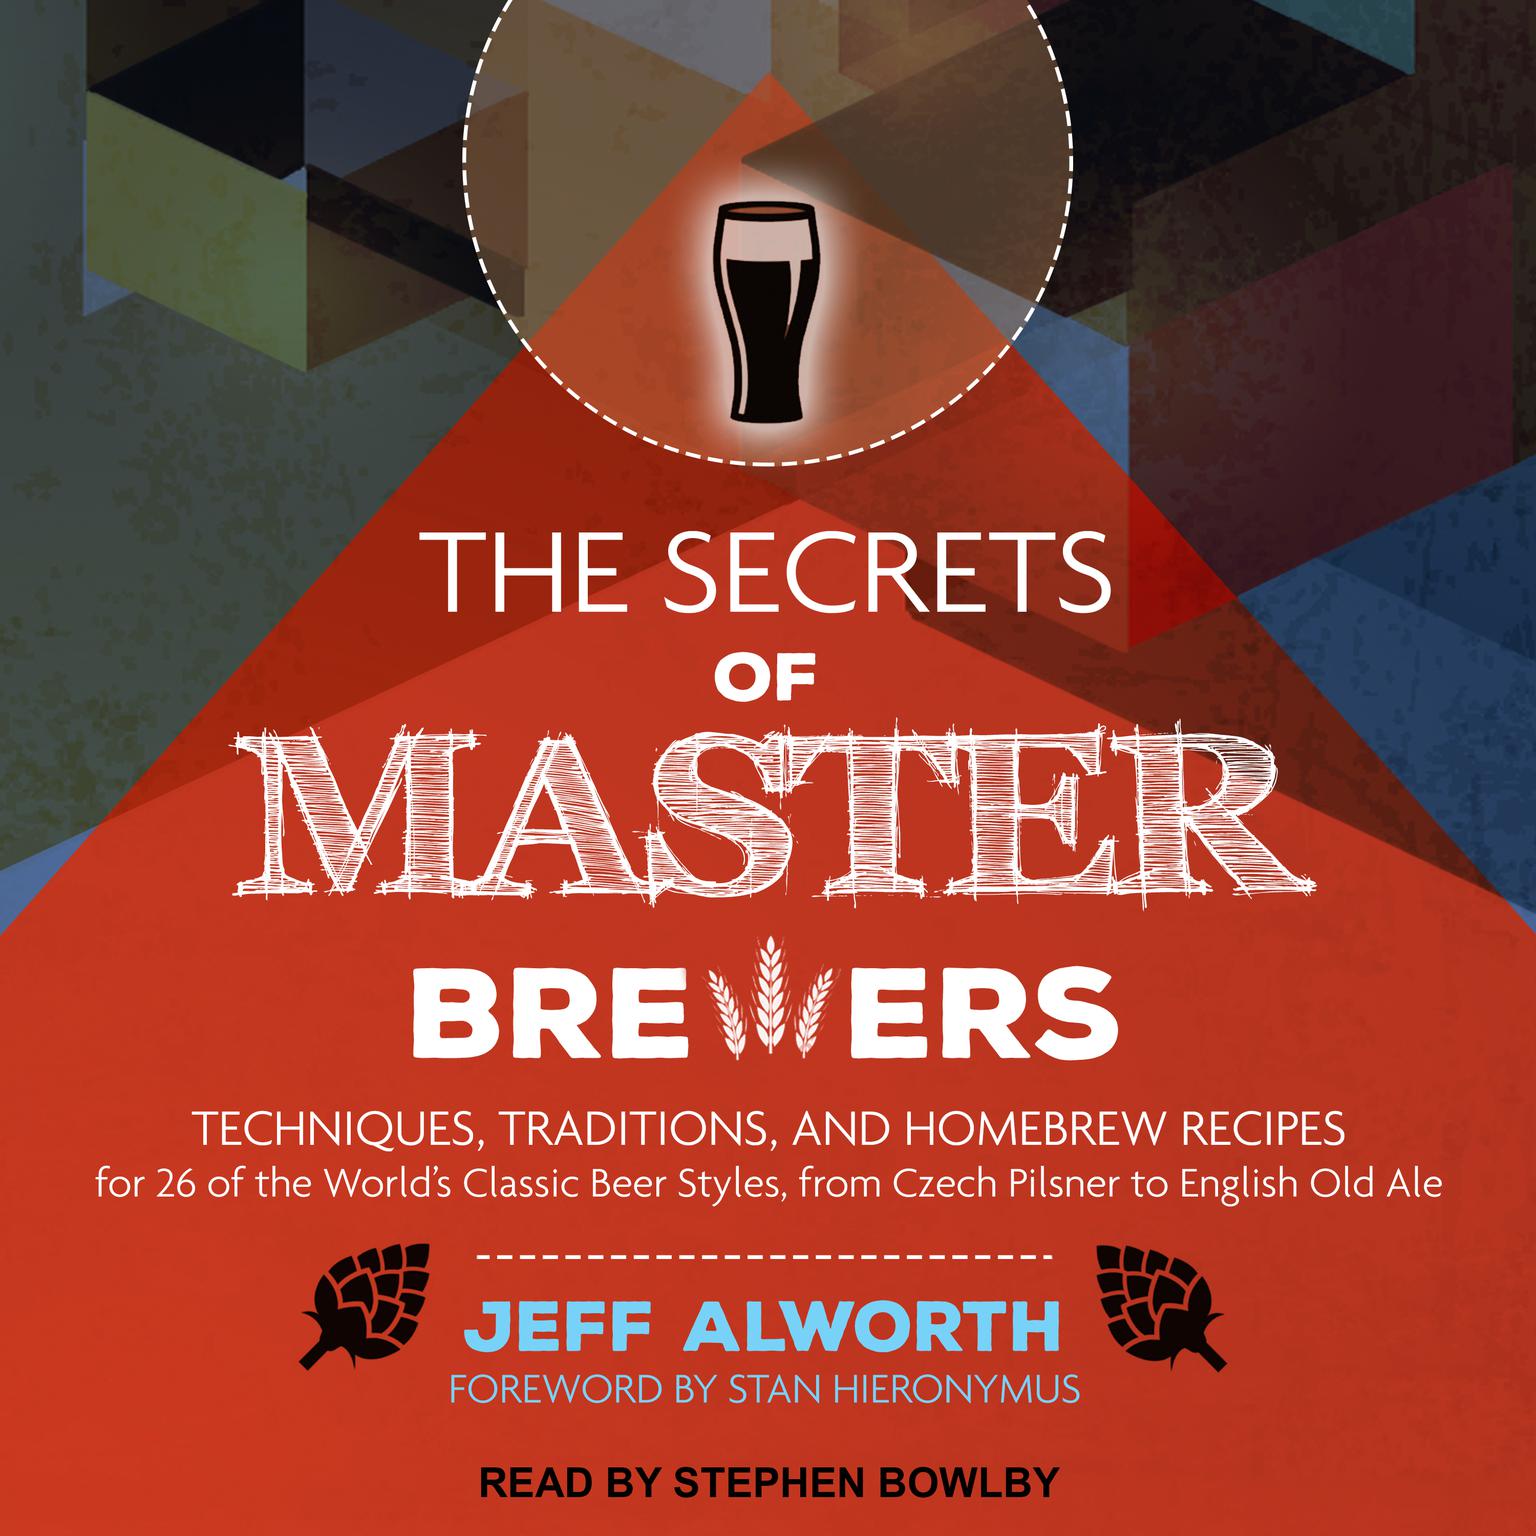 The Secrets of Master Brewers: Techniques, Traditions, and Homebrew Recipes for 26 of the Worlds Classic Beer Styles, from Czech Pilsner to English Old Ale Audiobook, by Jeff Alworth